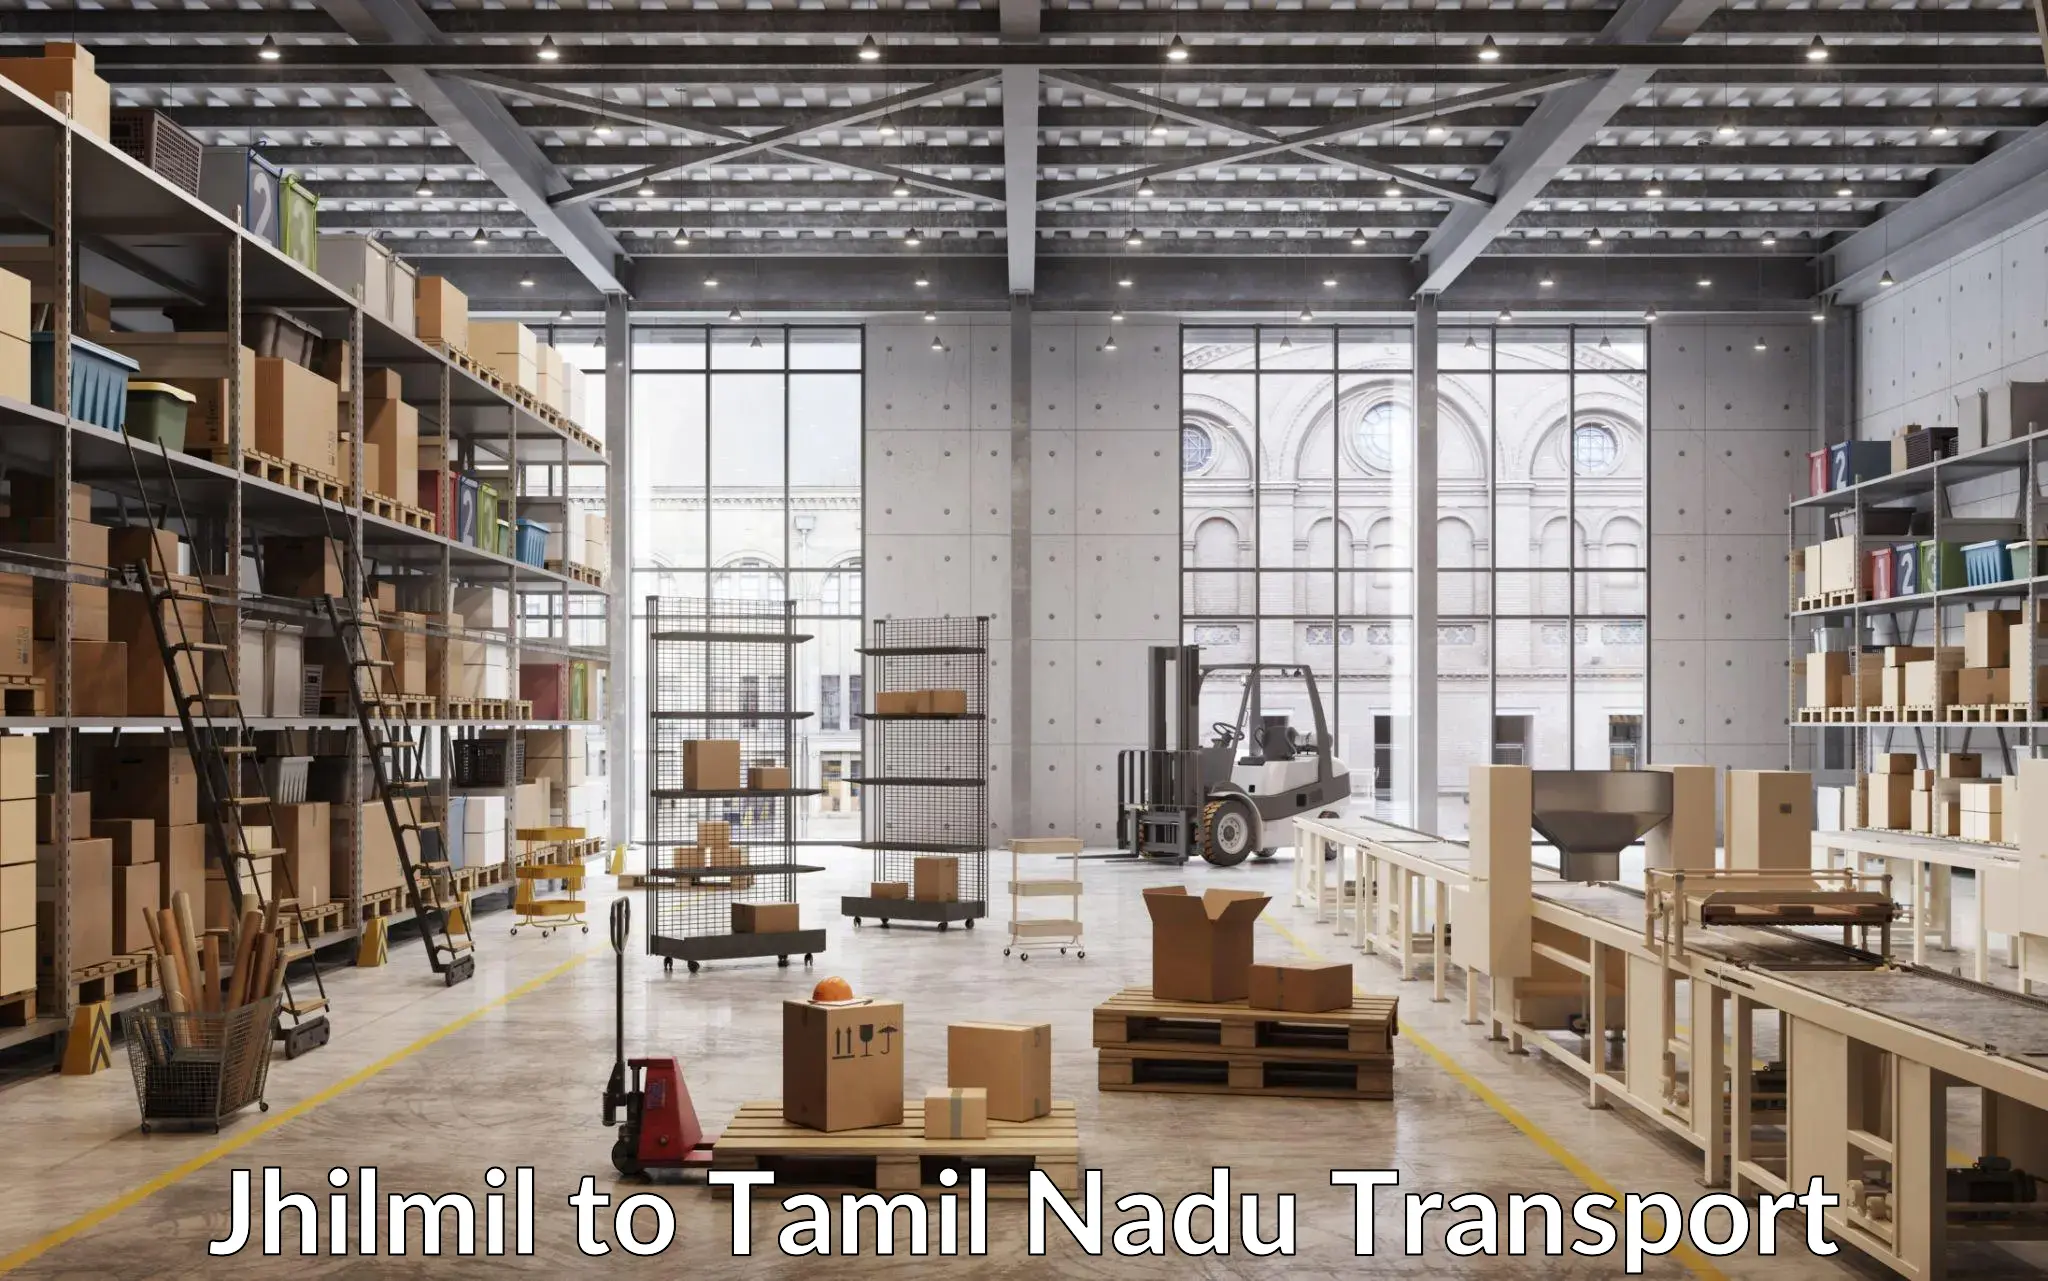 Air freight transport services Jhilmil to Tiruppur